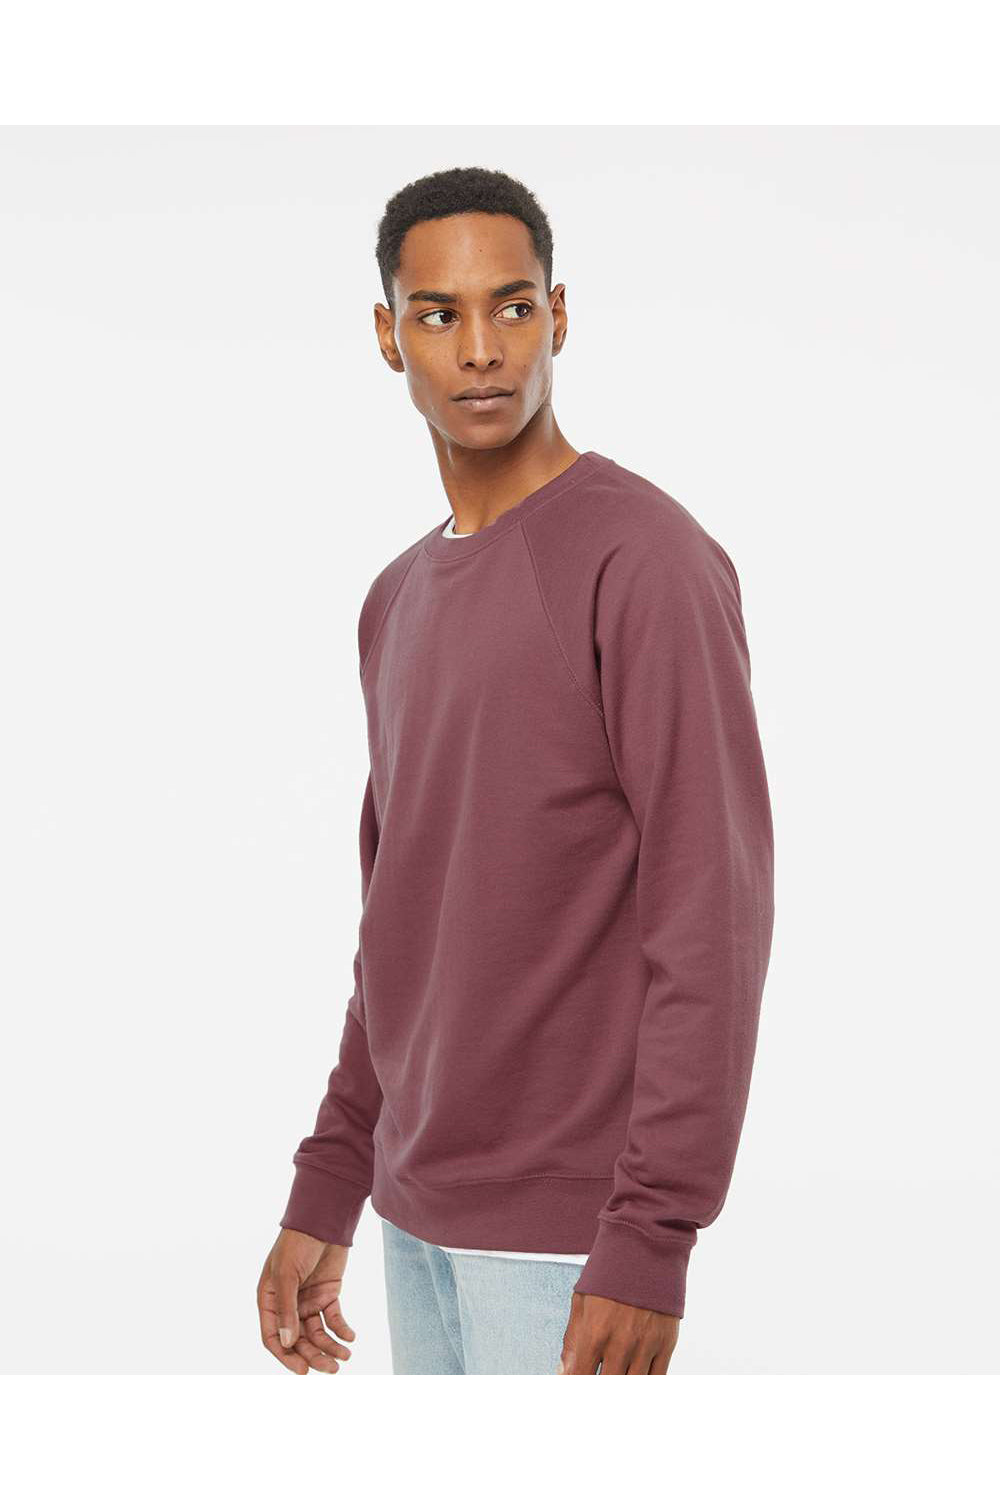 Independent Trading Co. SS1000C Mens Icon Loopback Terry Crewneck Sweatshirt Port Model Side